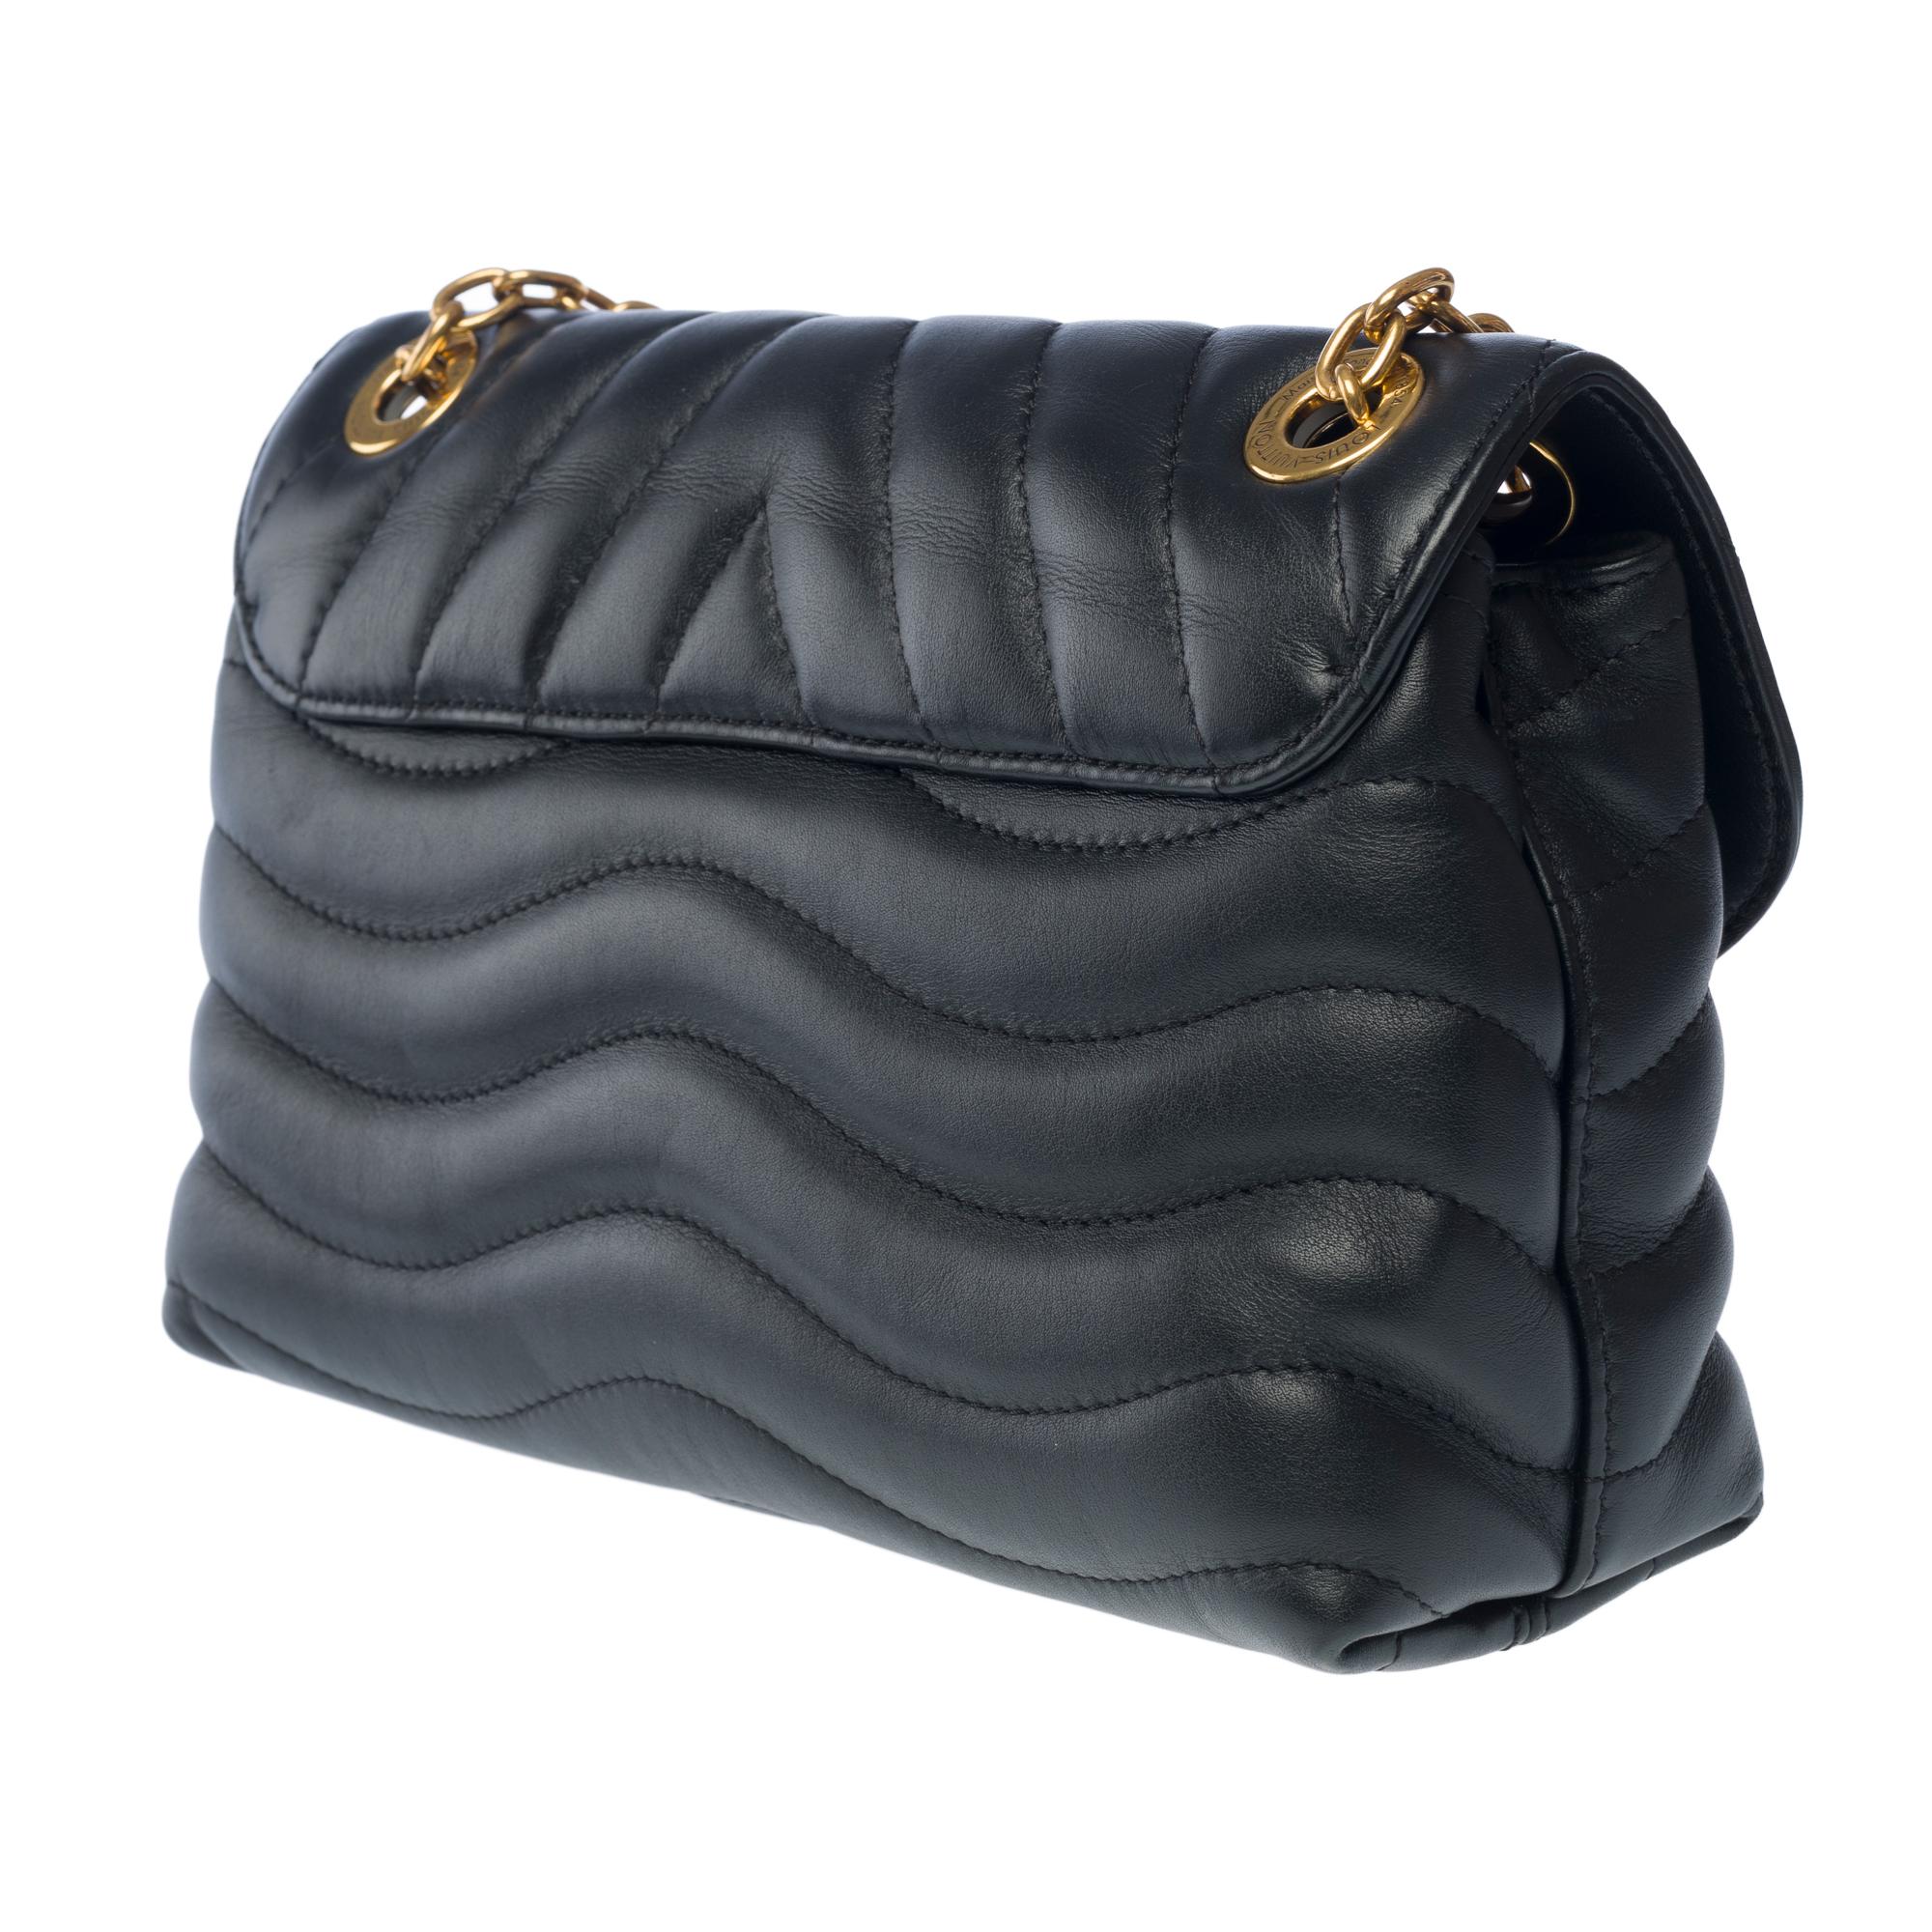 Louis Vuitton Wave shoulder bag in Black quilted calf leather, GHW 1